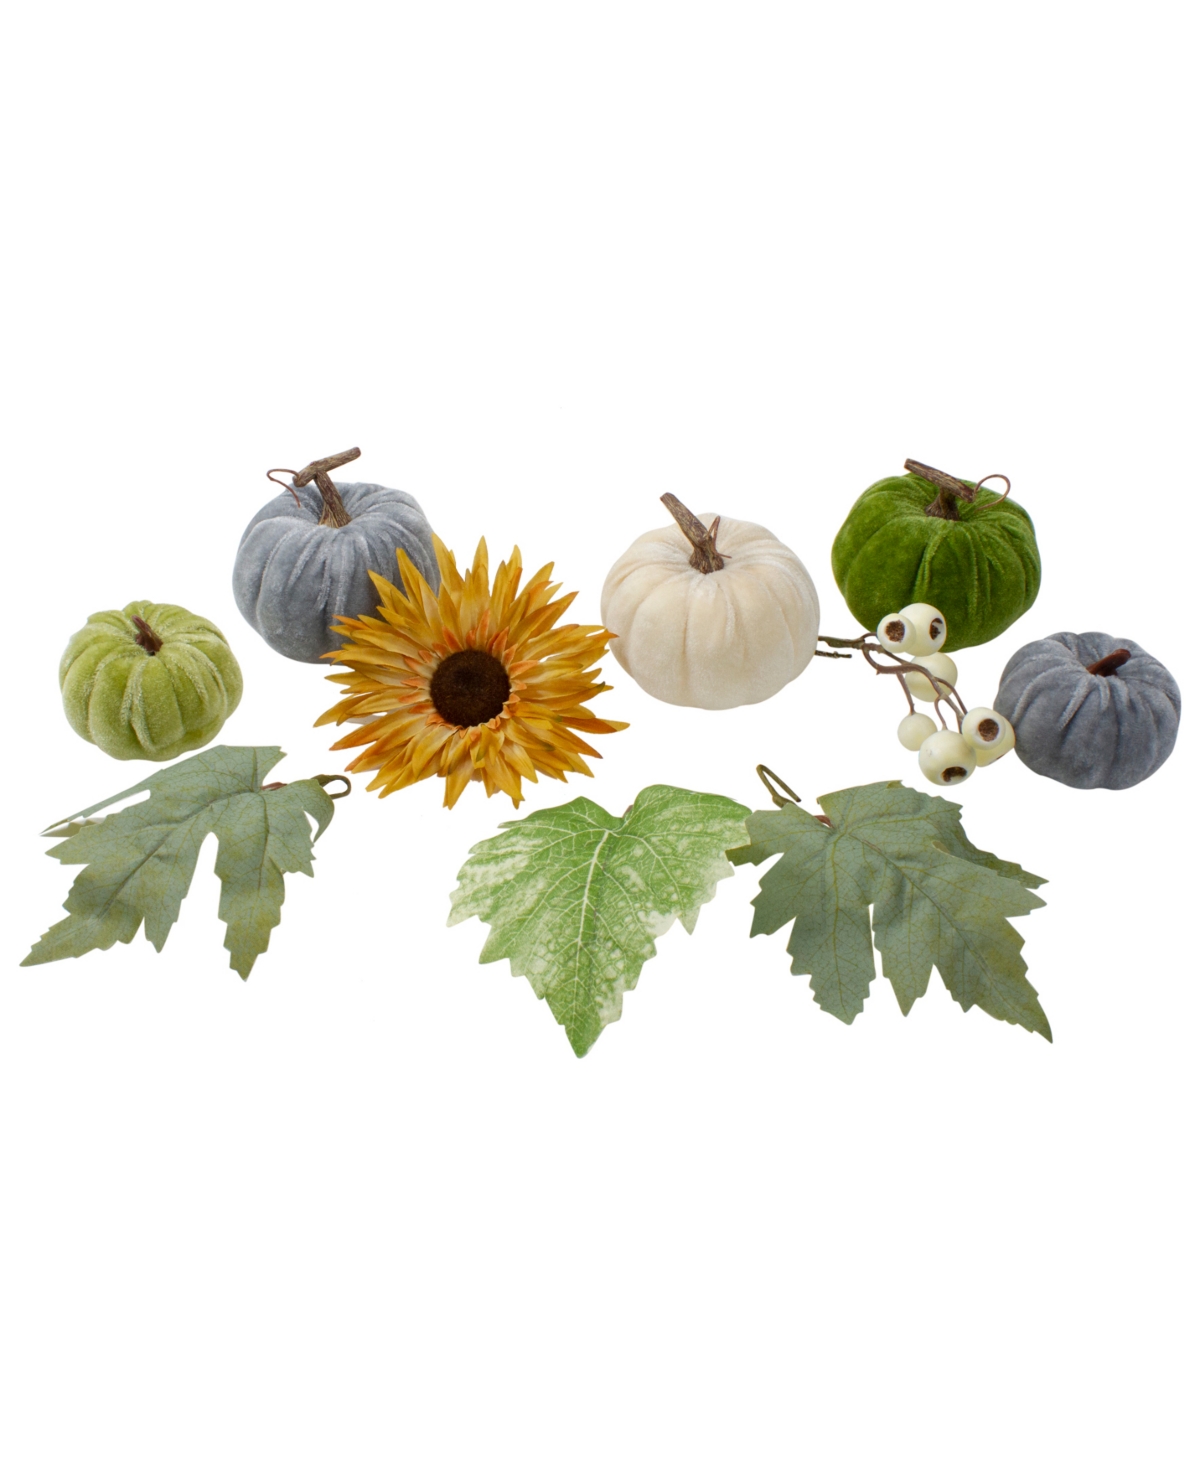 Set of 10 Pumpkins Berries Flowers and Leaves Thanksgiving Decor Set - Green